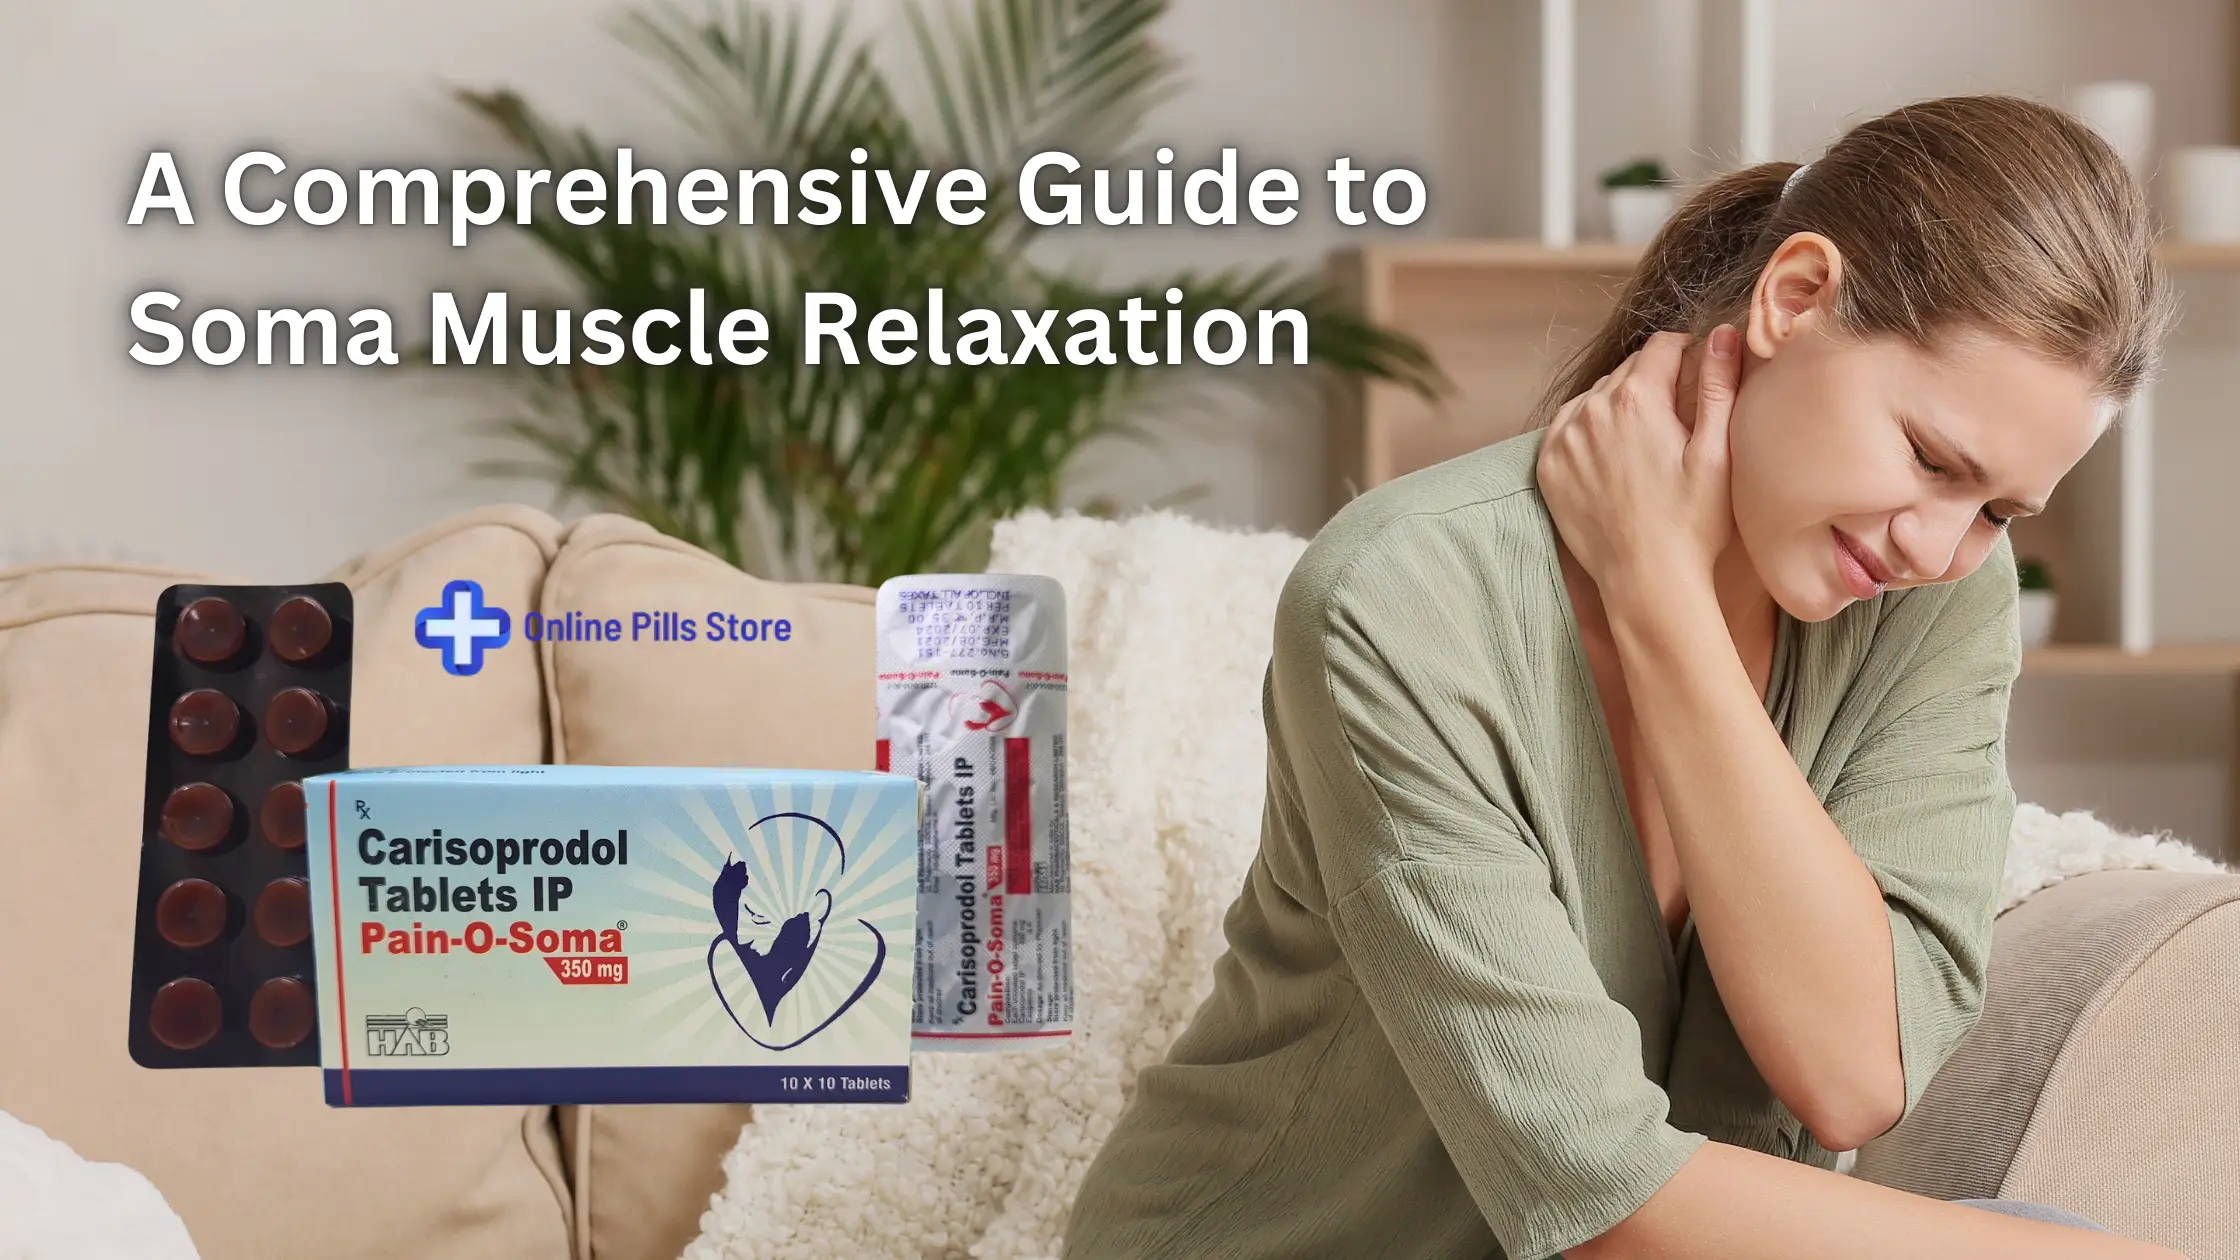 A Comprehensive Guide to Soma Muscle Relaxation